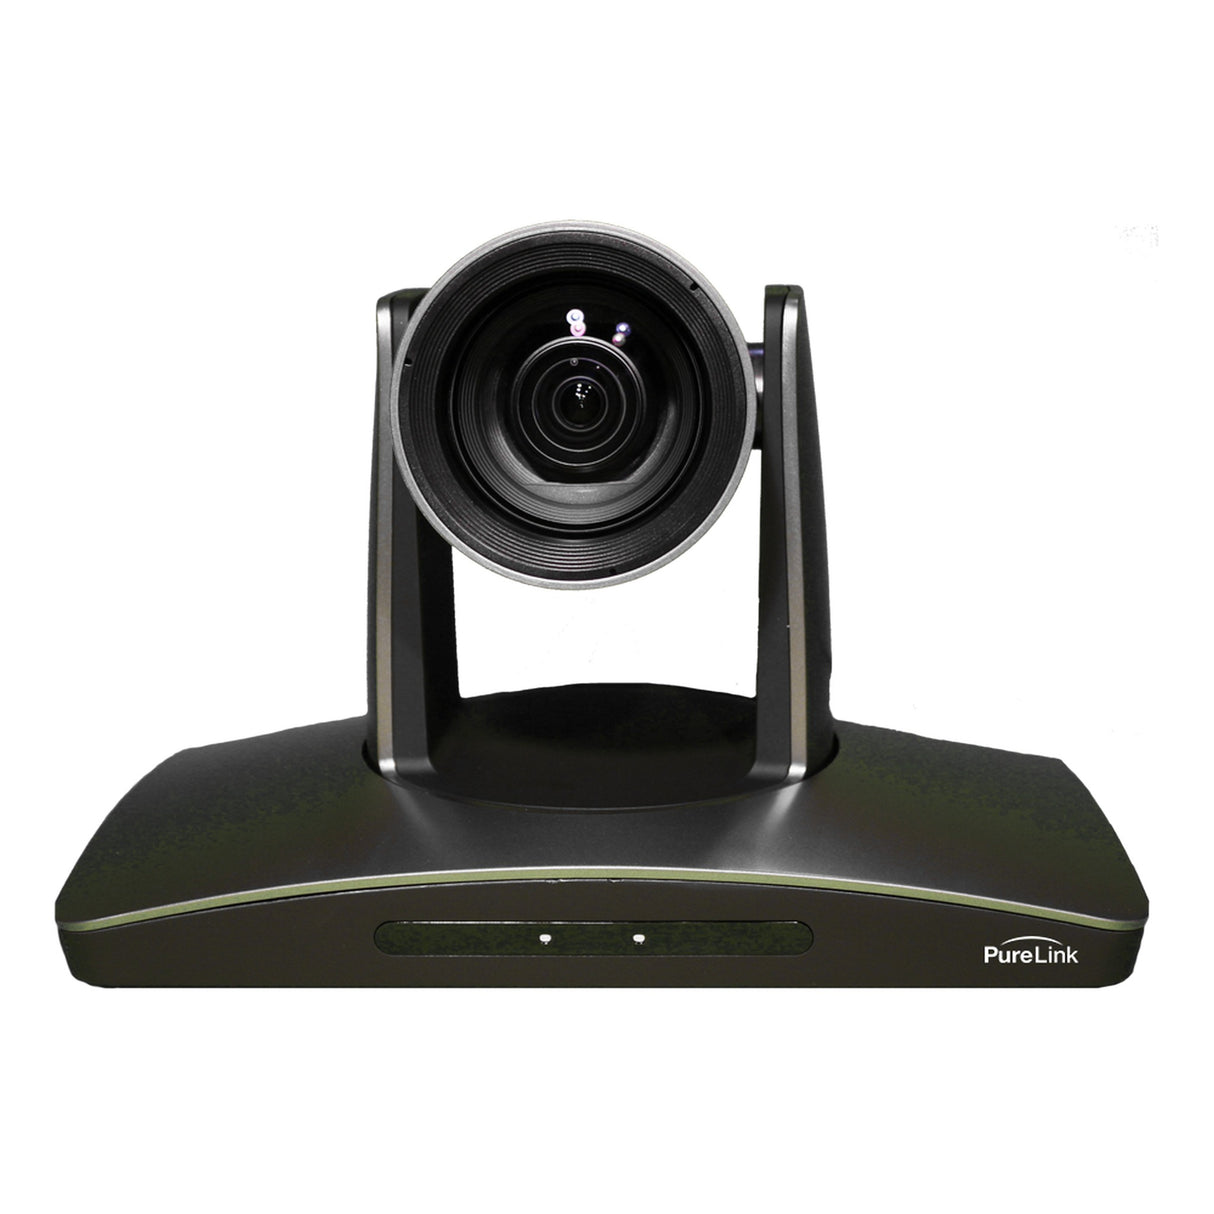 PureLink VIP-CAM-30-20x Pro PTZ Camera with HDMI, USB 2.0, and LAN Output